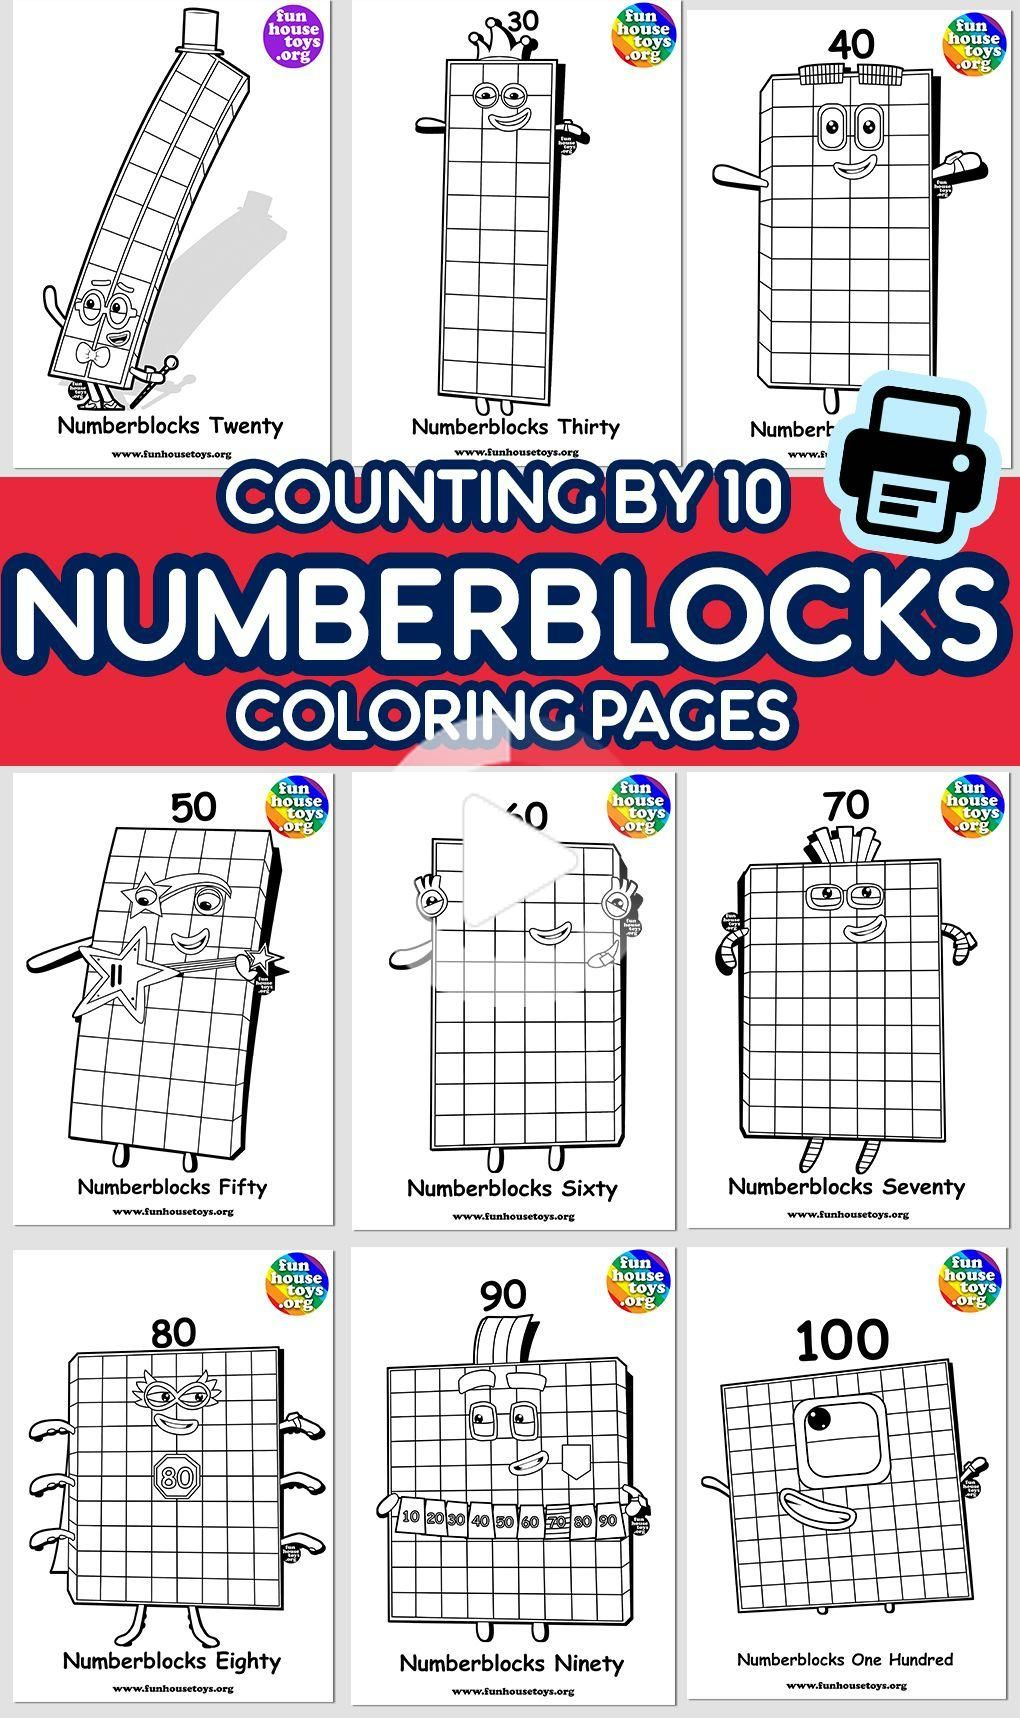 New Numberblocks 100 Available As Coloring Printable For 